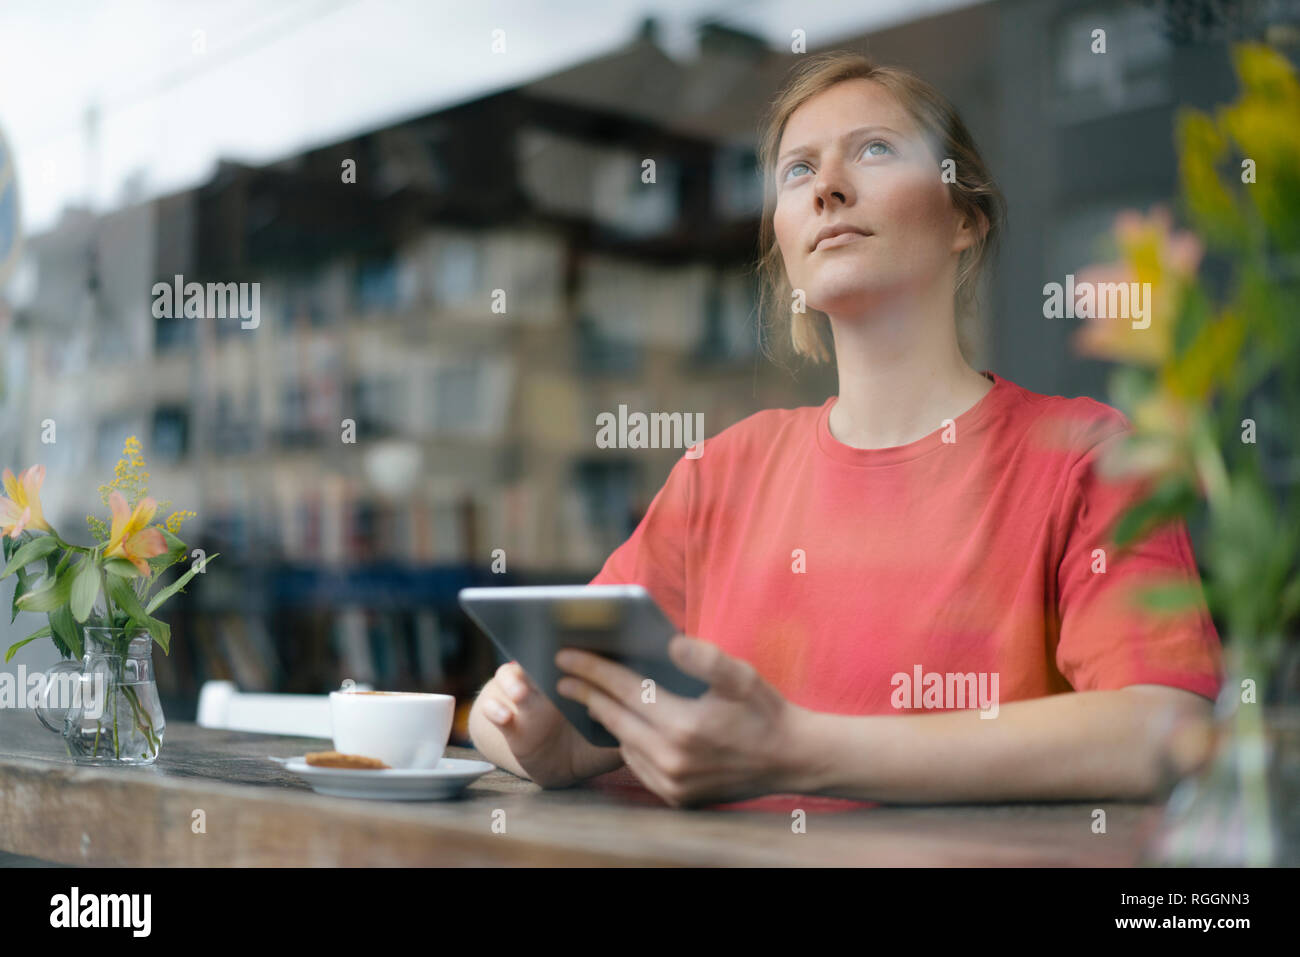 Young woman using tablet at the window in a cafe Stock Photo